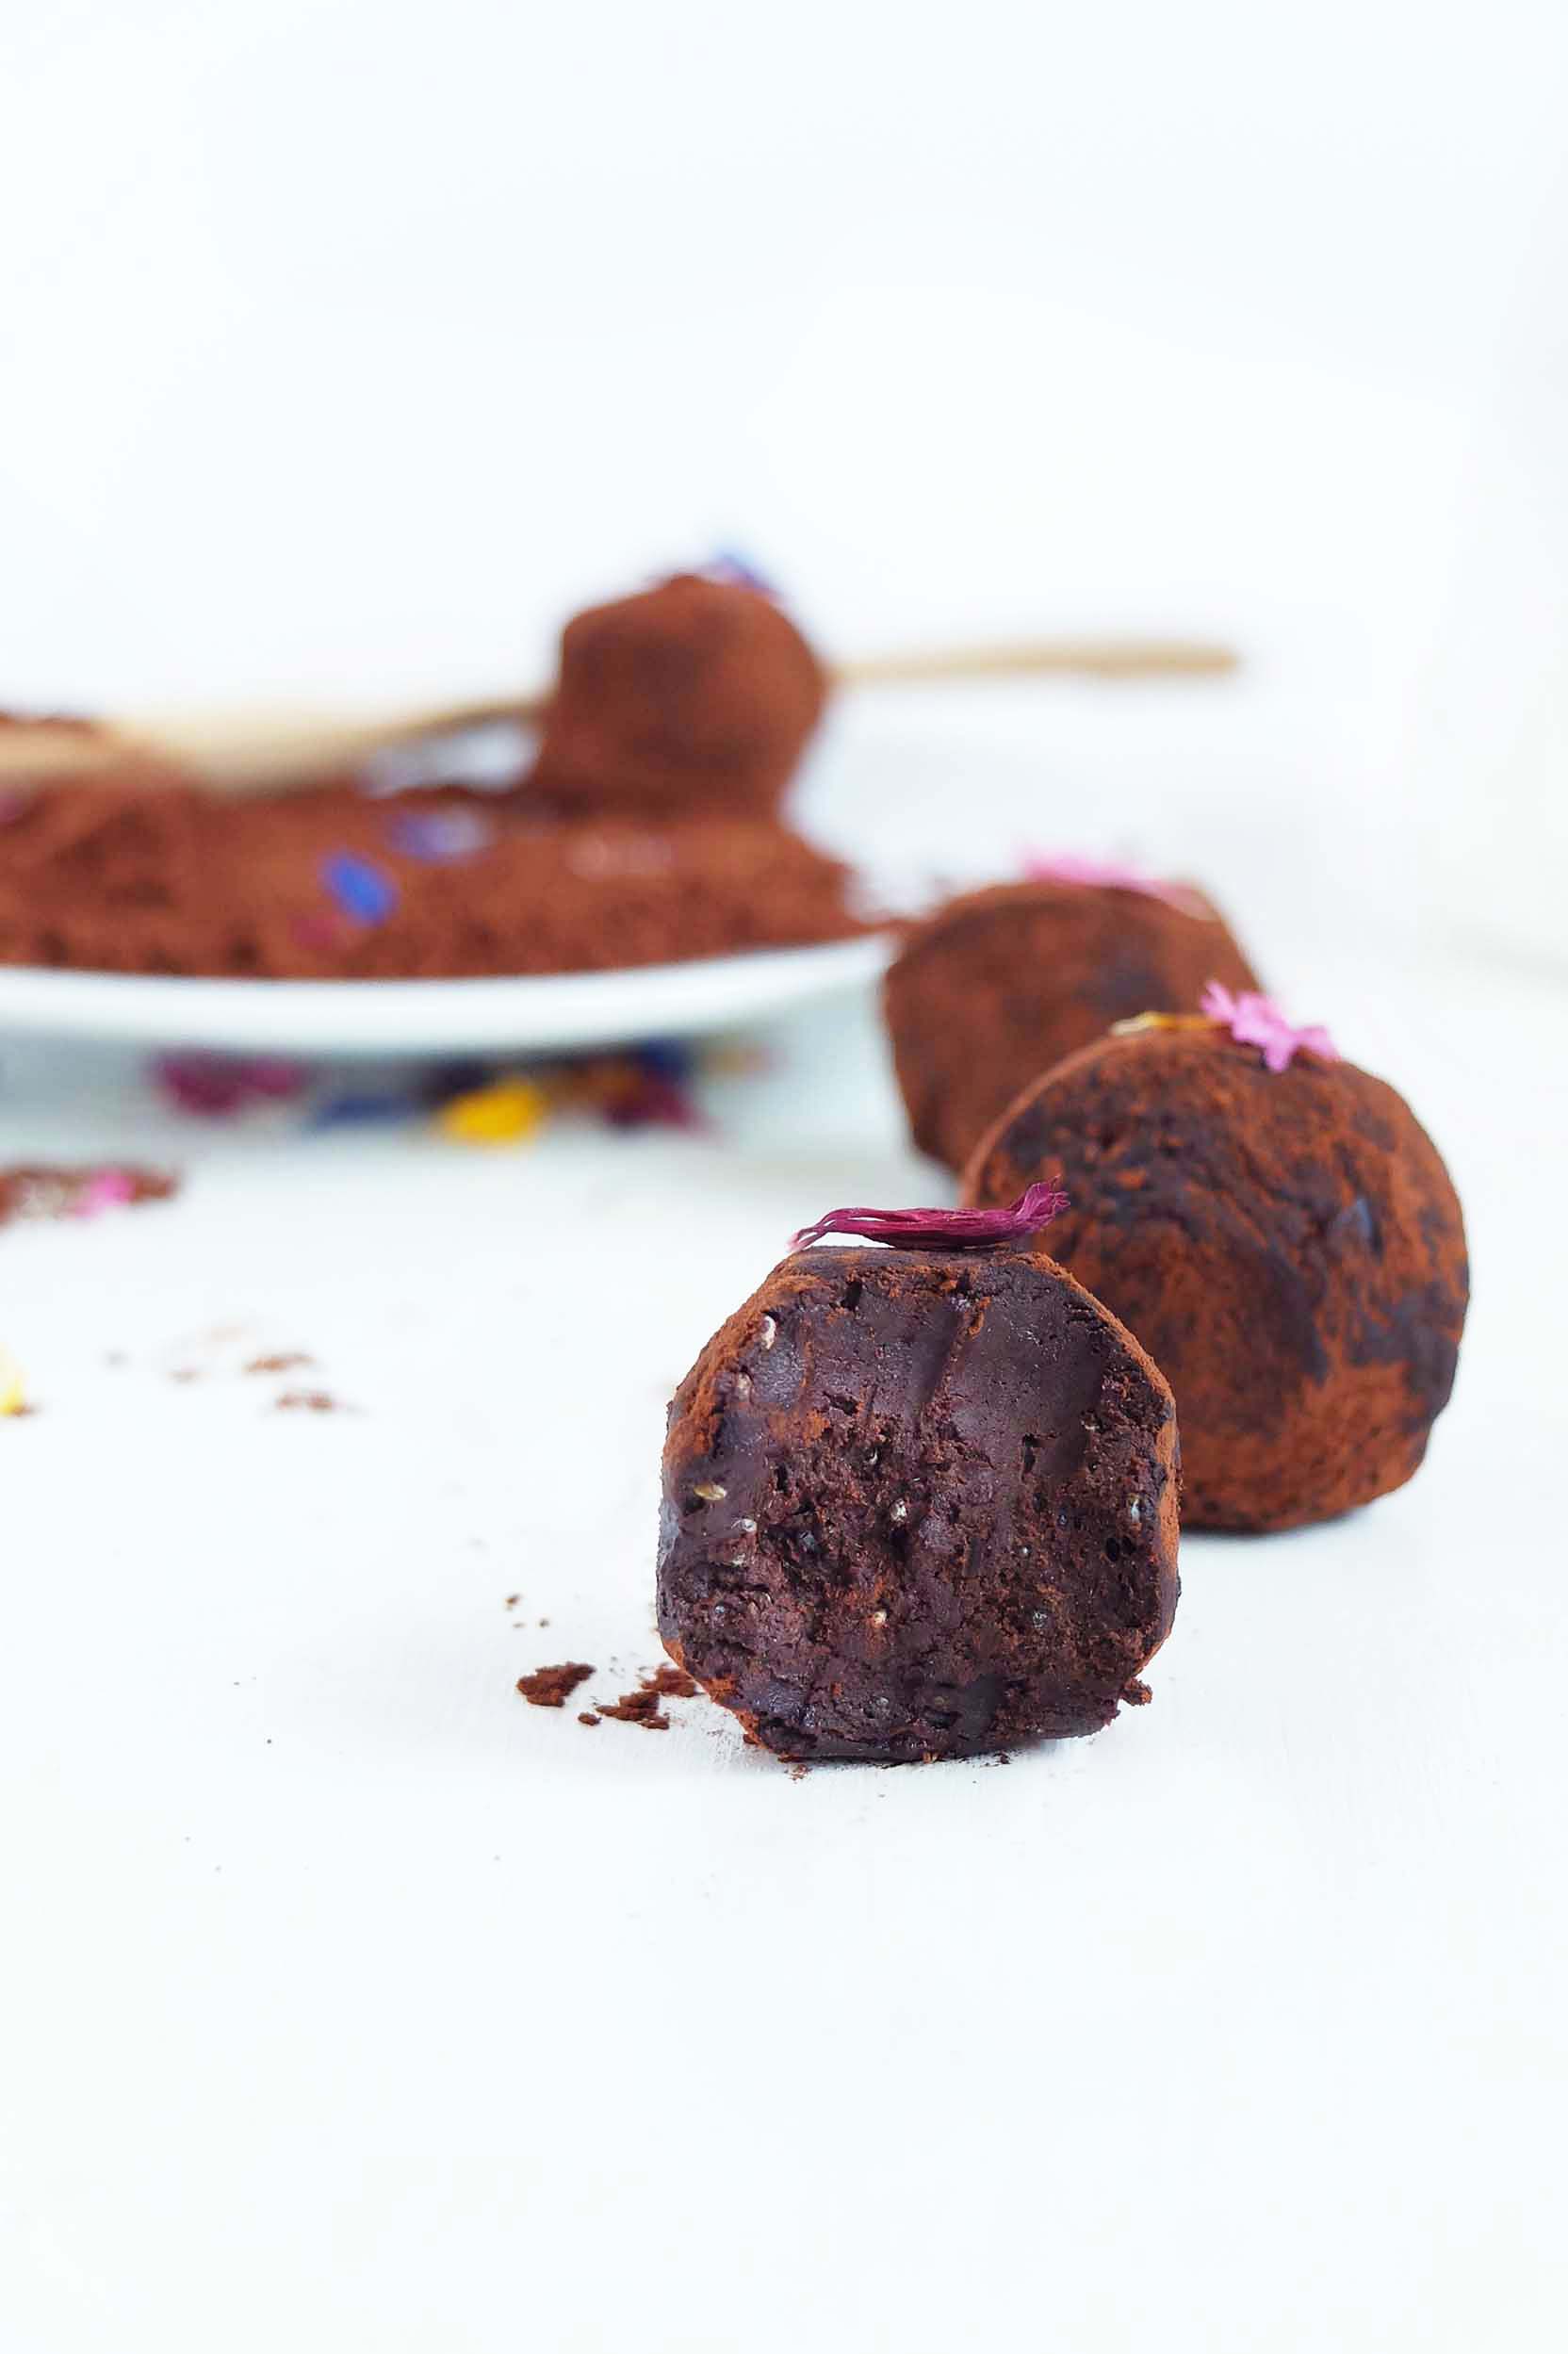 Healthy Chocolate truffles made in just 10 minutes